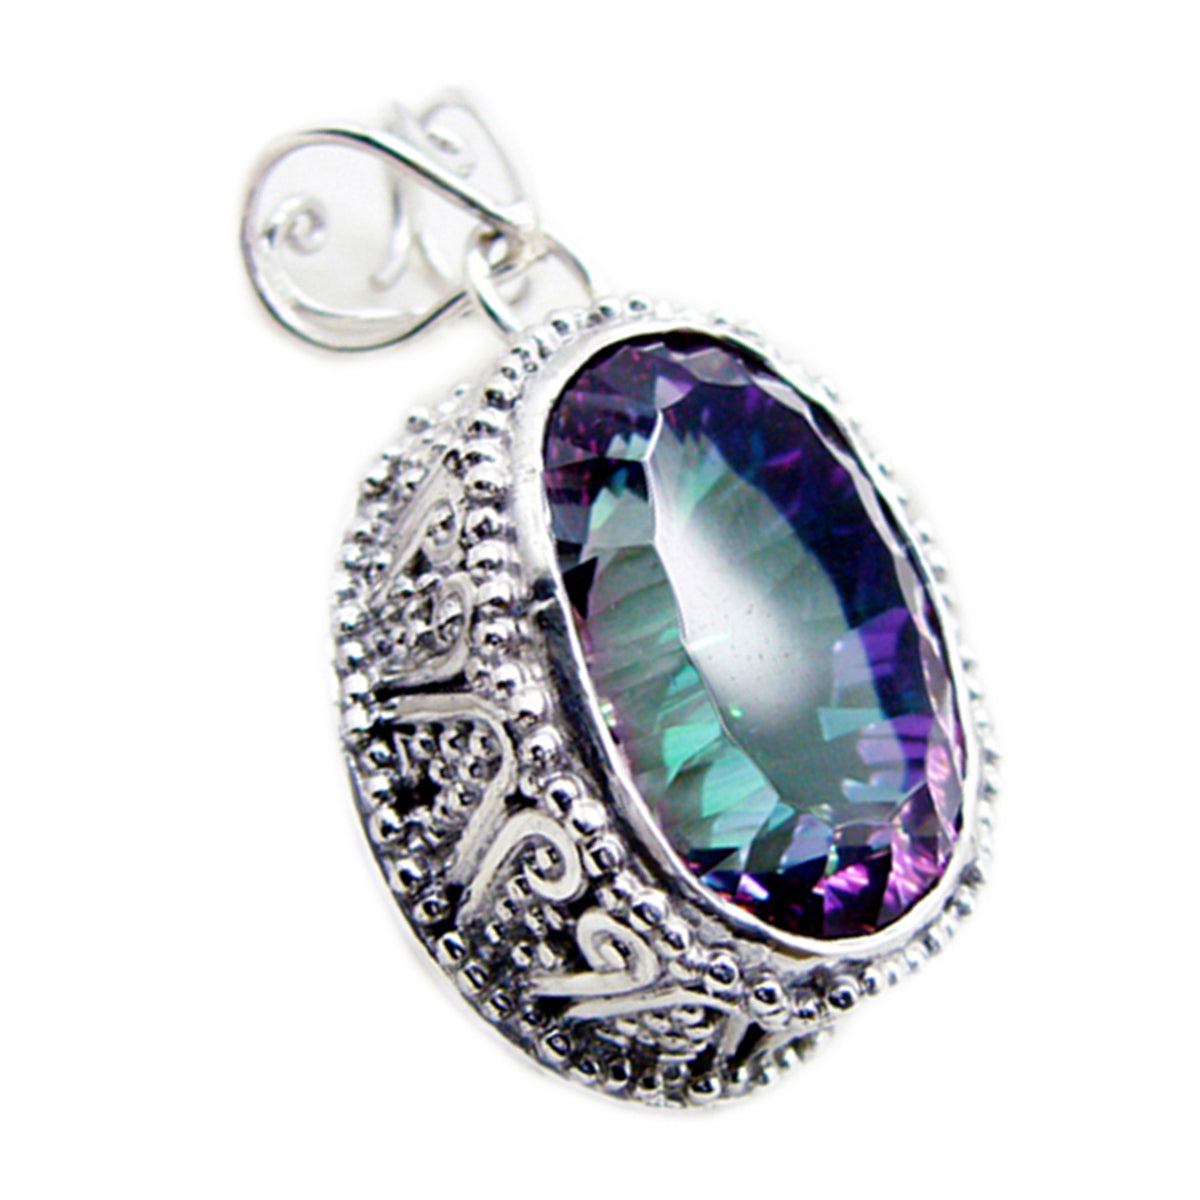 Riyo Alluring Gems Oval Faceted Multi Color Mystic Quartz Solid Silver Pendant Gift For Easter Sunday